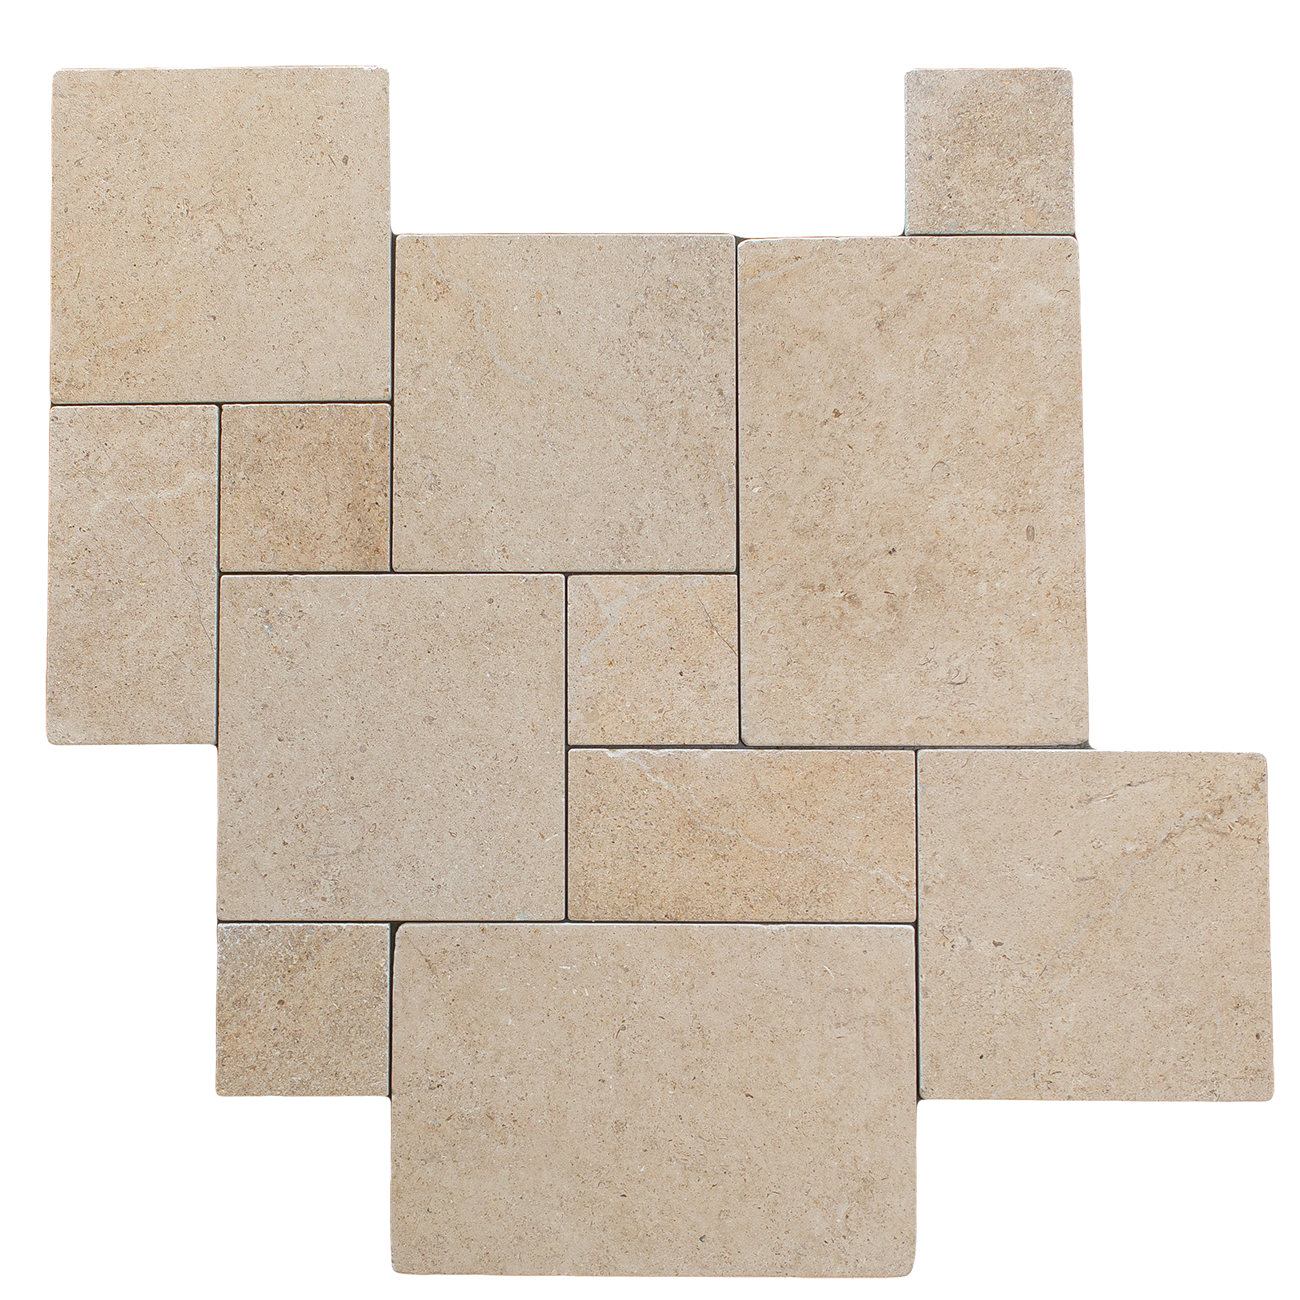 haussmann cecina natural limestone manoir interior pattern tumbled brushed 5_8 inch thick